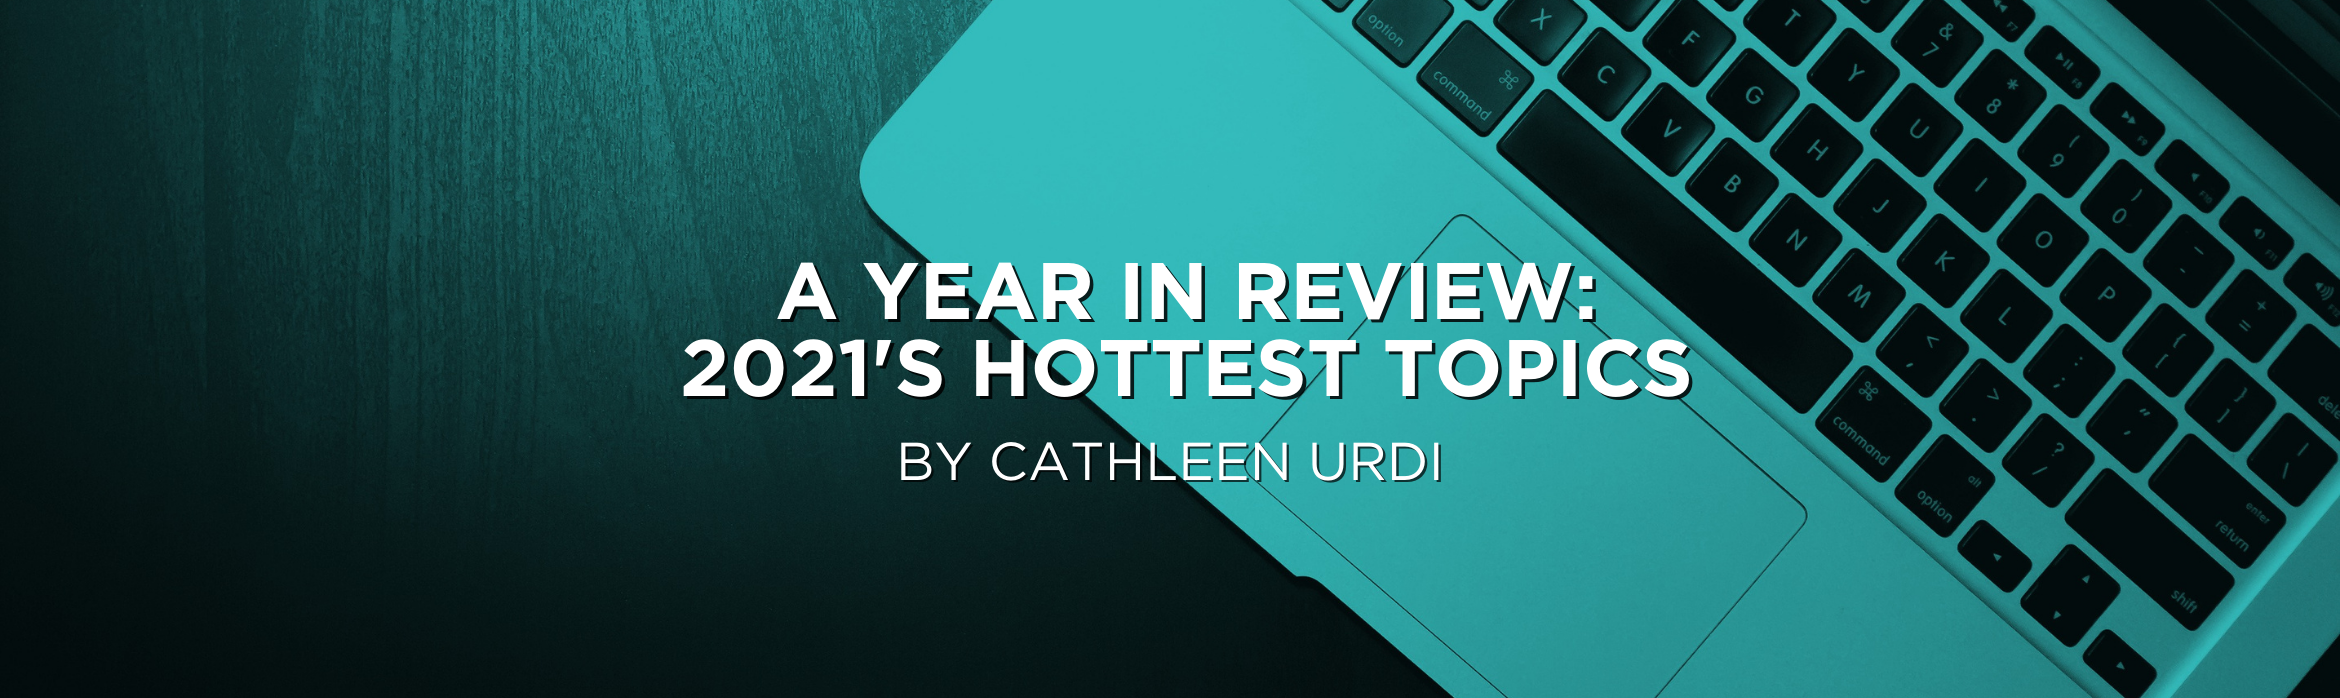 A Year in Review: 2021’s Hottest Topics